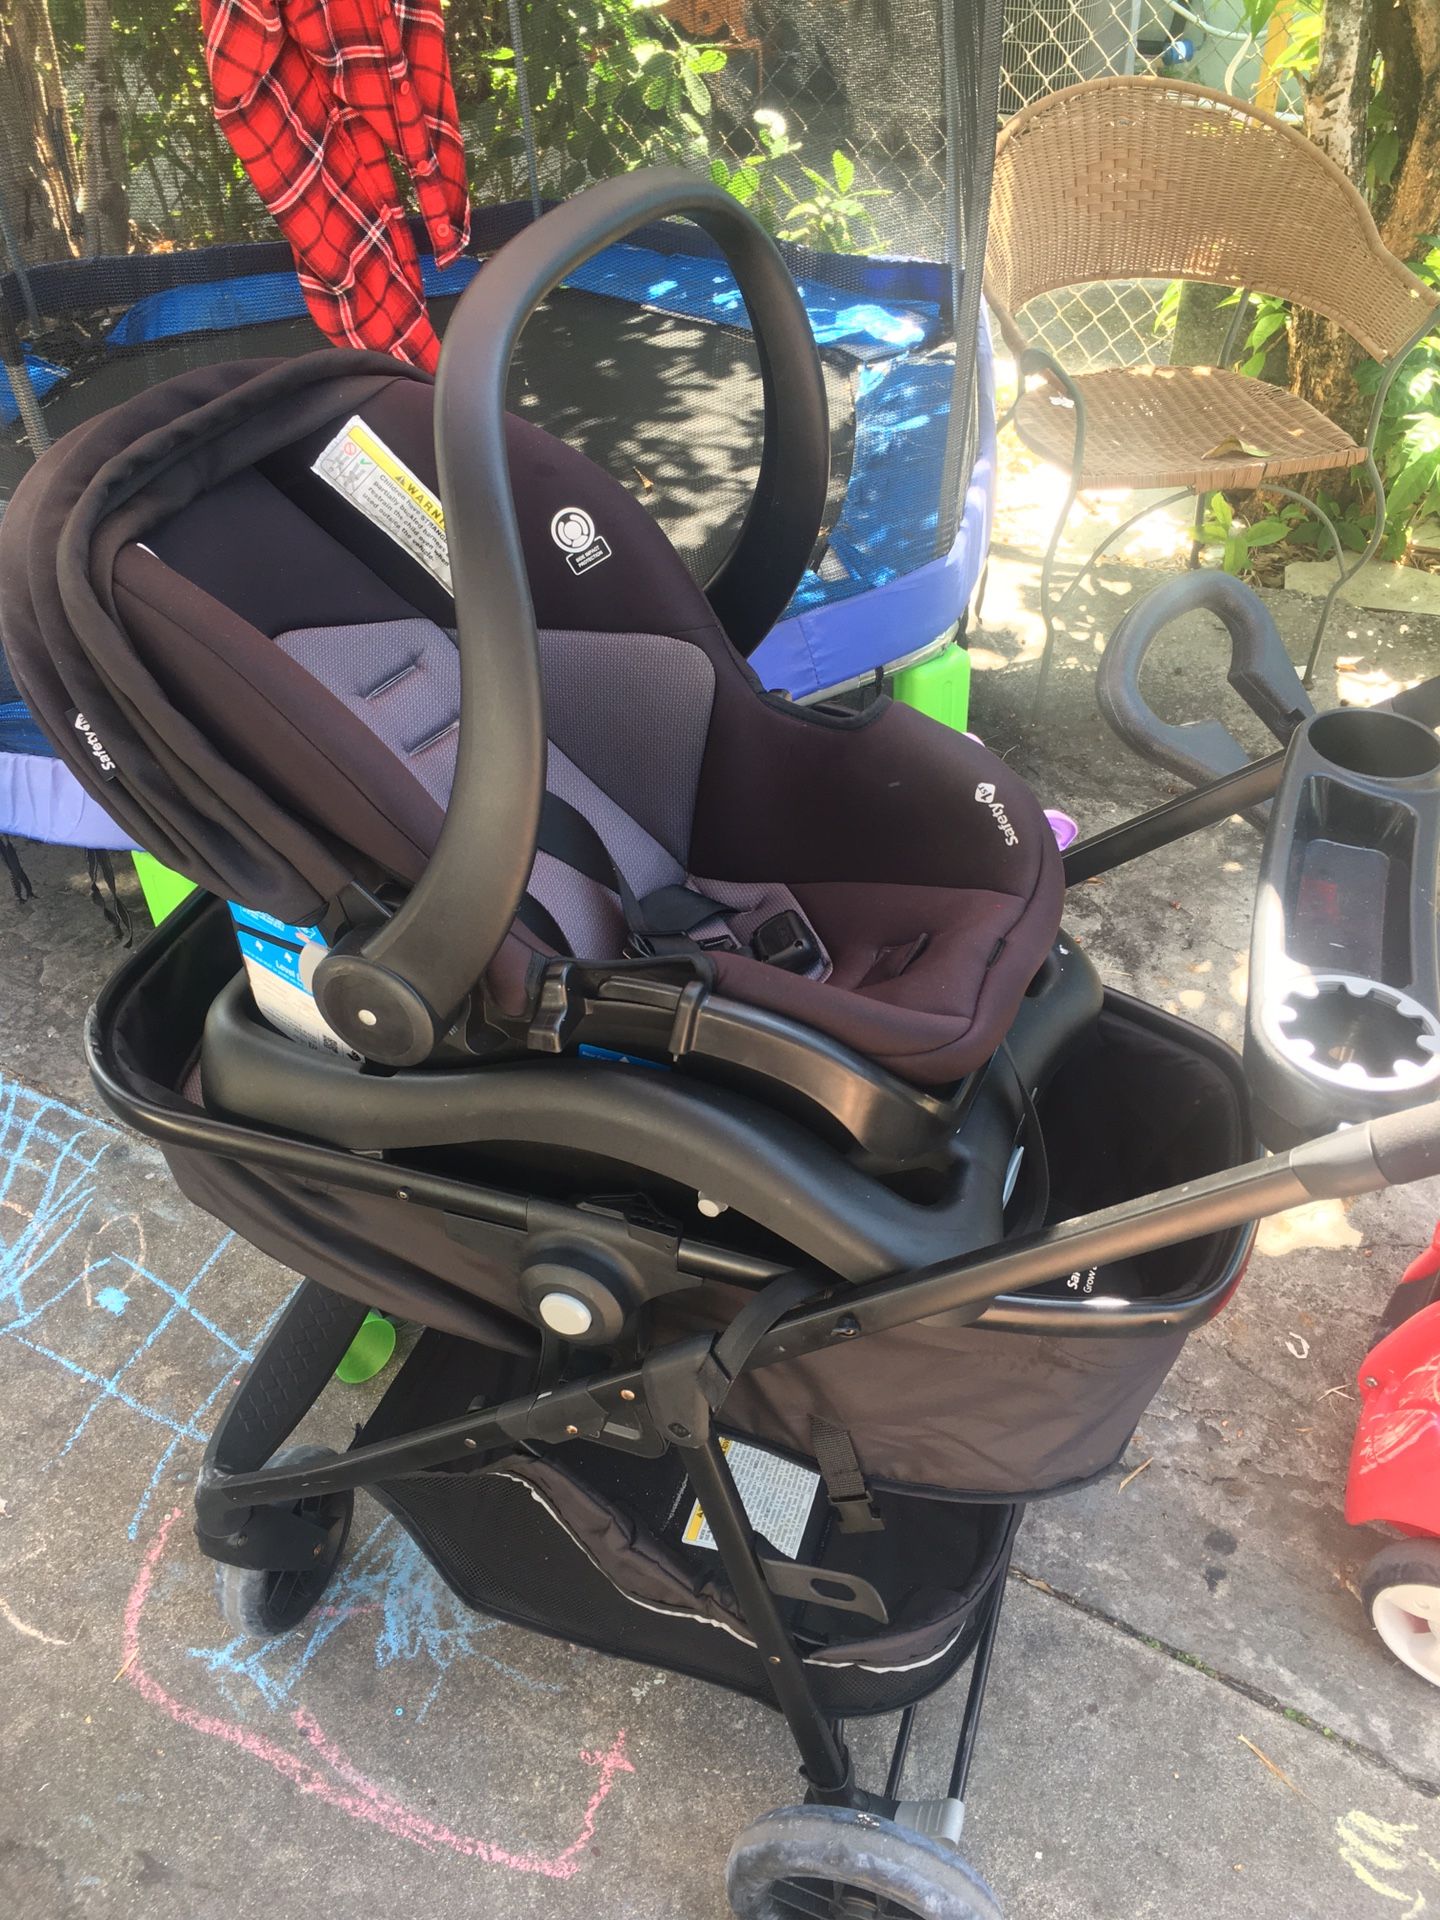 Grow And Go Baby Stroller And Car seat